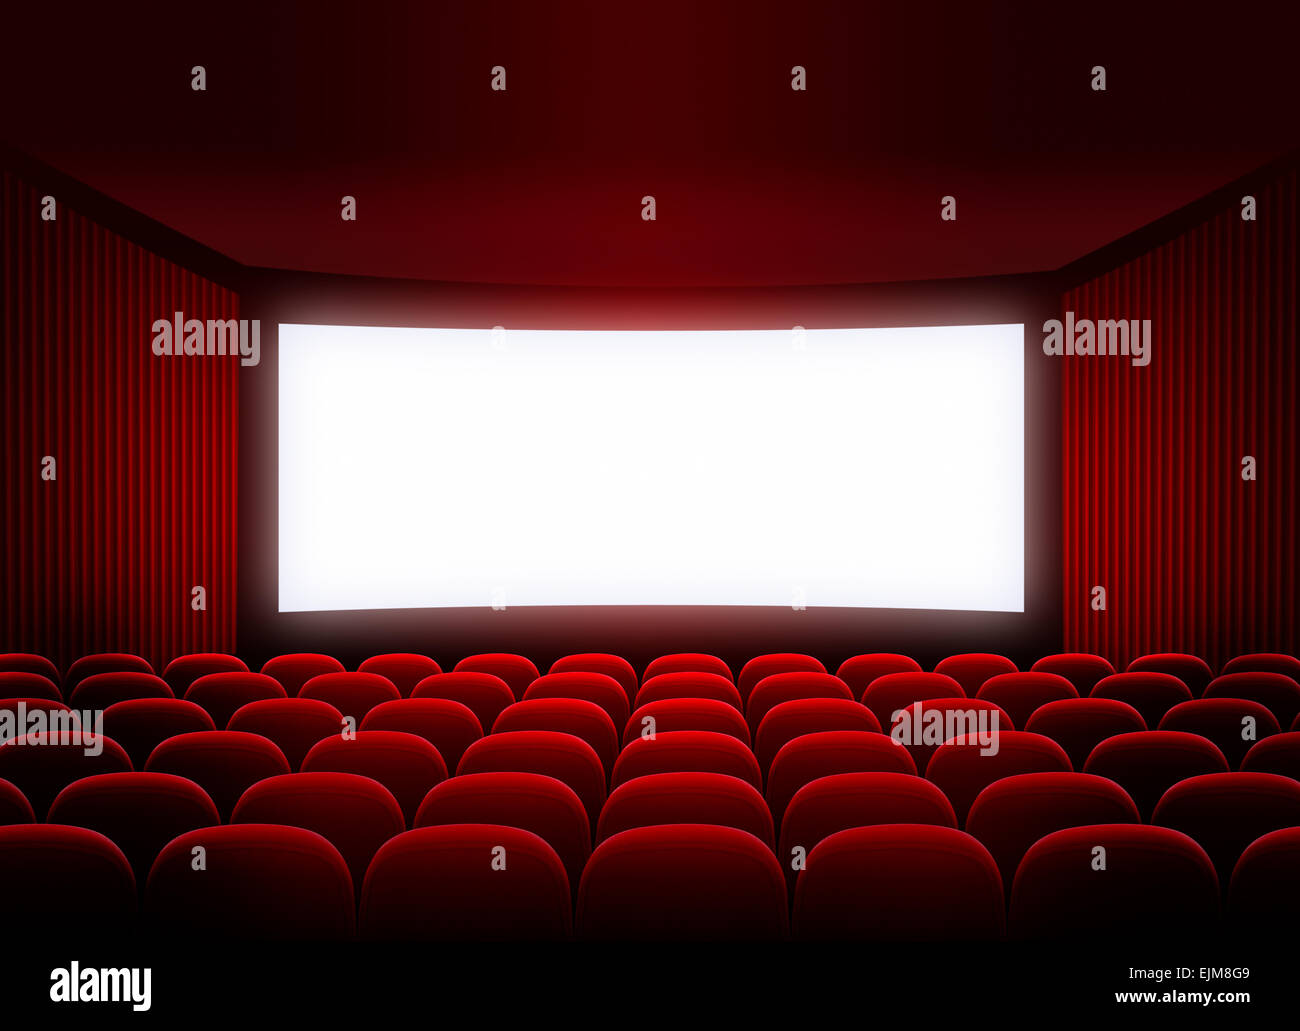 cinema screen in red audience Stock Photo